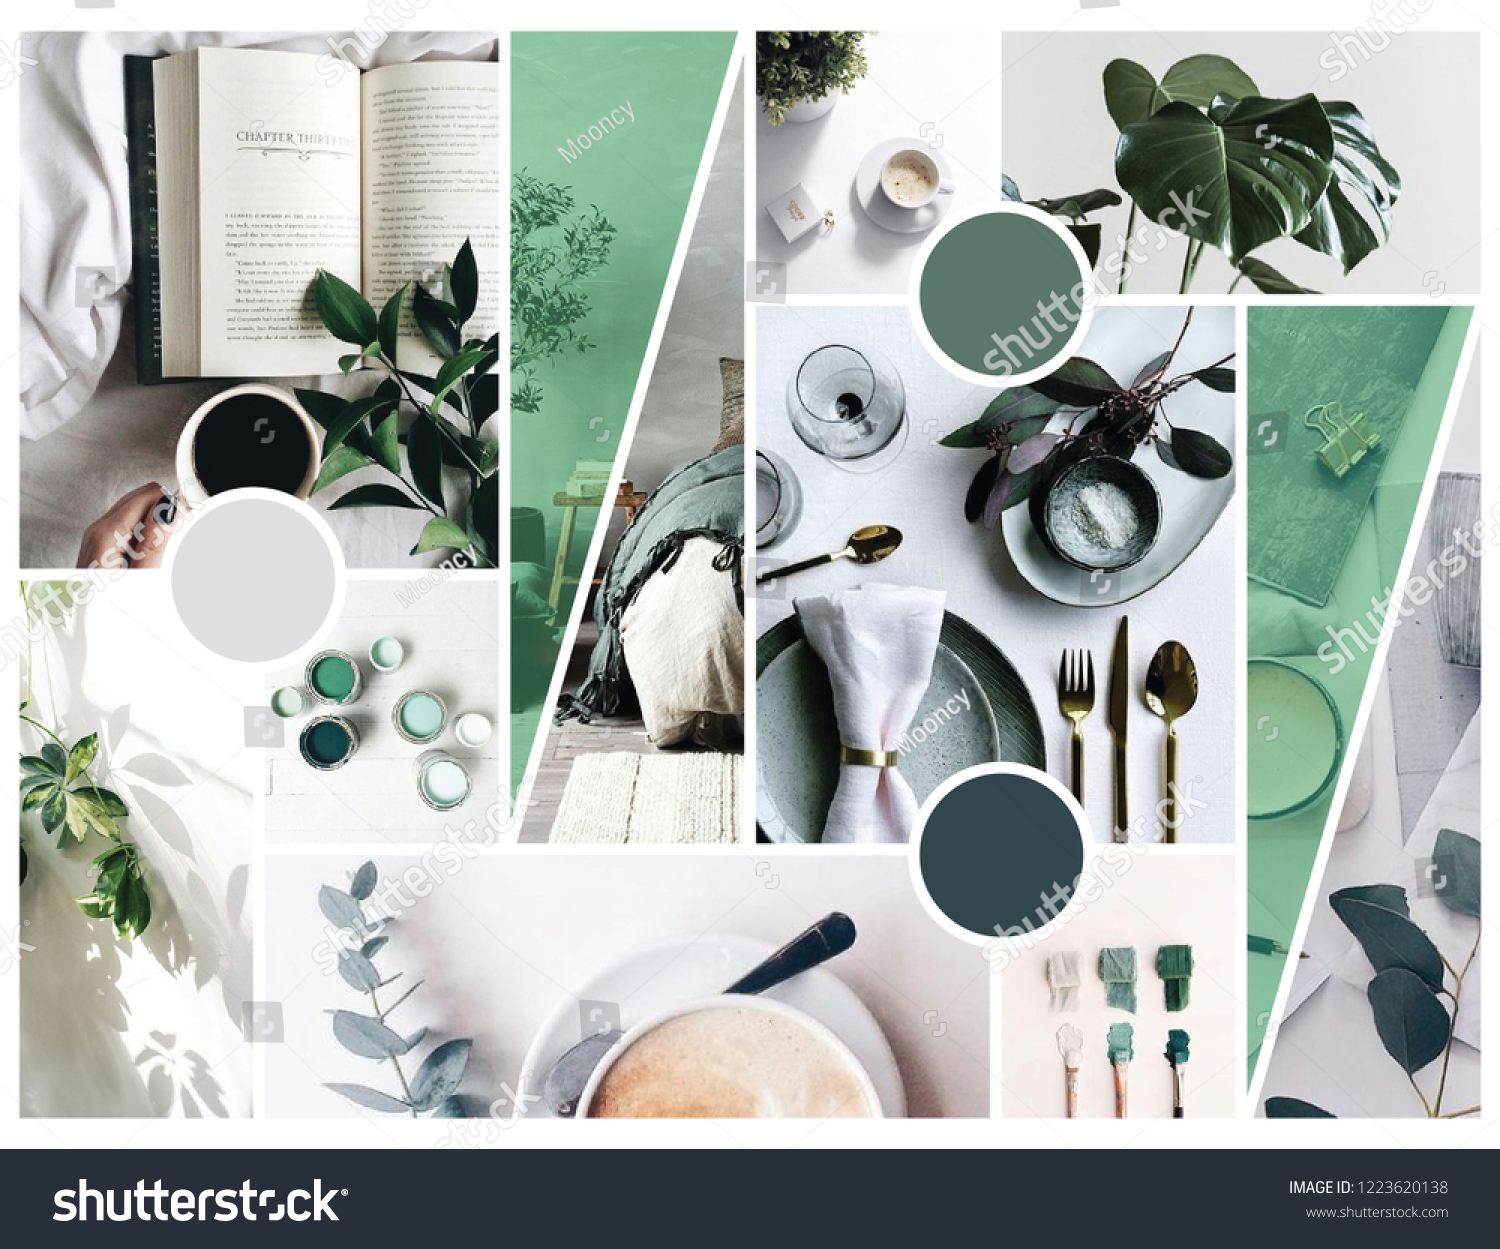 A mood board express the feeling of cozy, comfy, and green.
I design it for those who love green and cozy, wish to design their home in the similar way. #1223620138